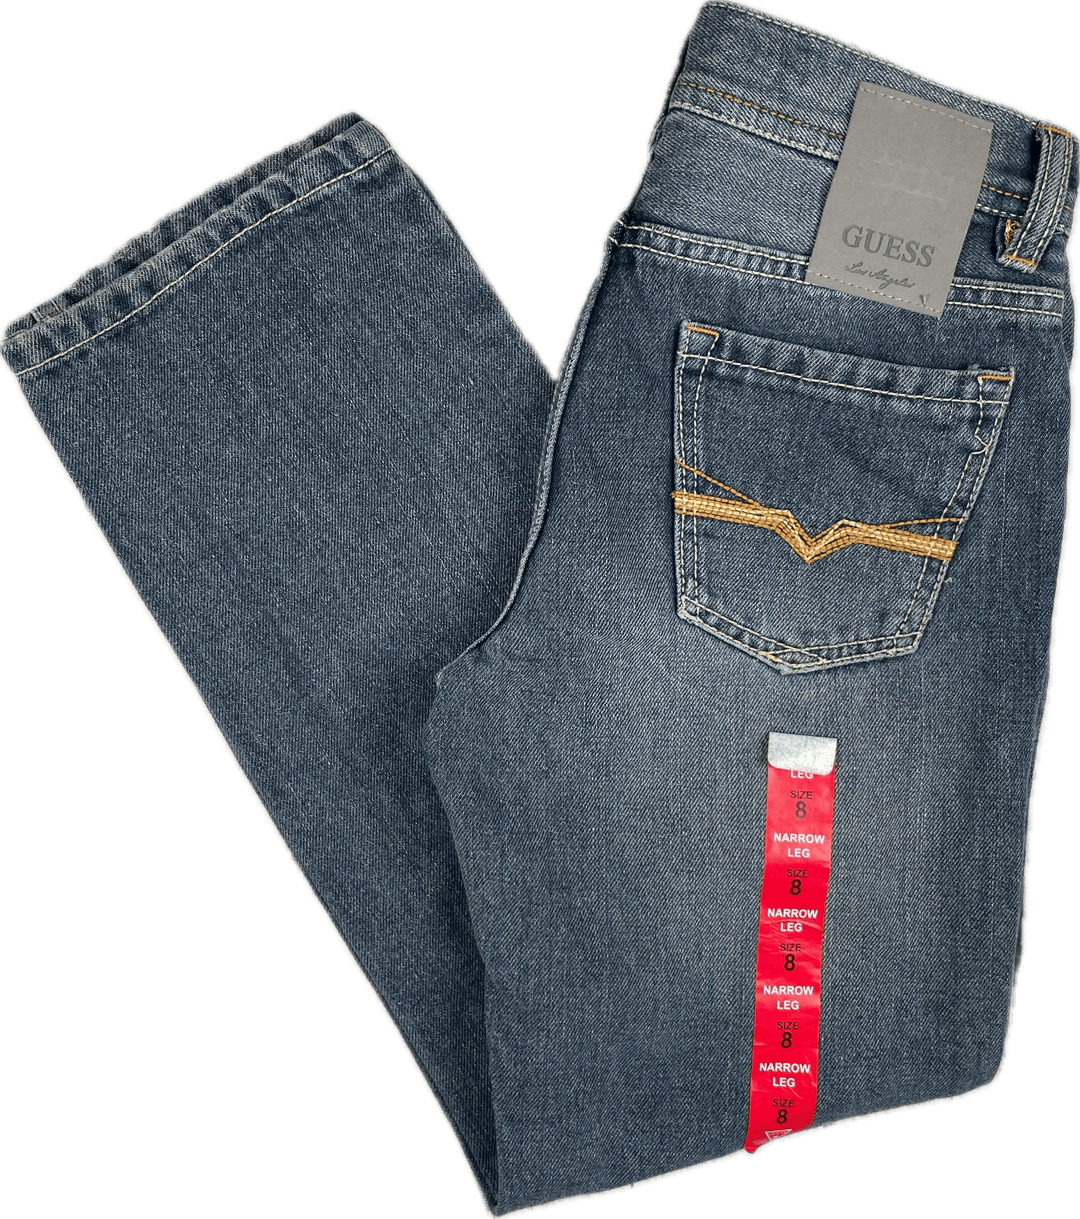 NWT - Guess Straight Narrow Leg Distressed jeans - Size 8Y - Jean Pool